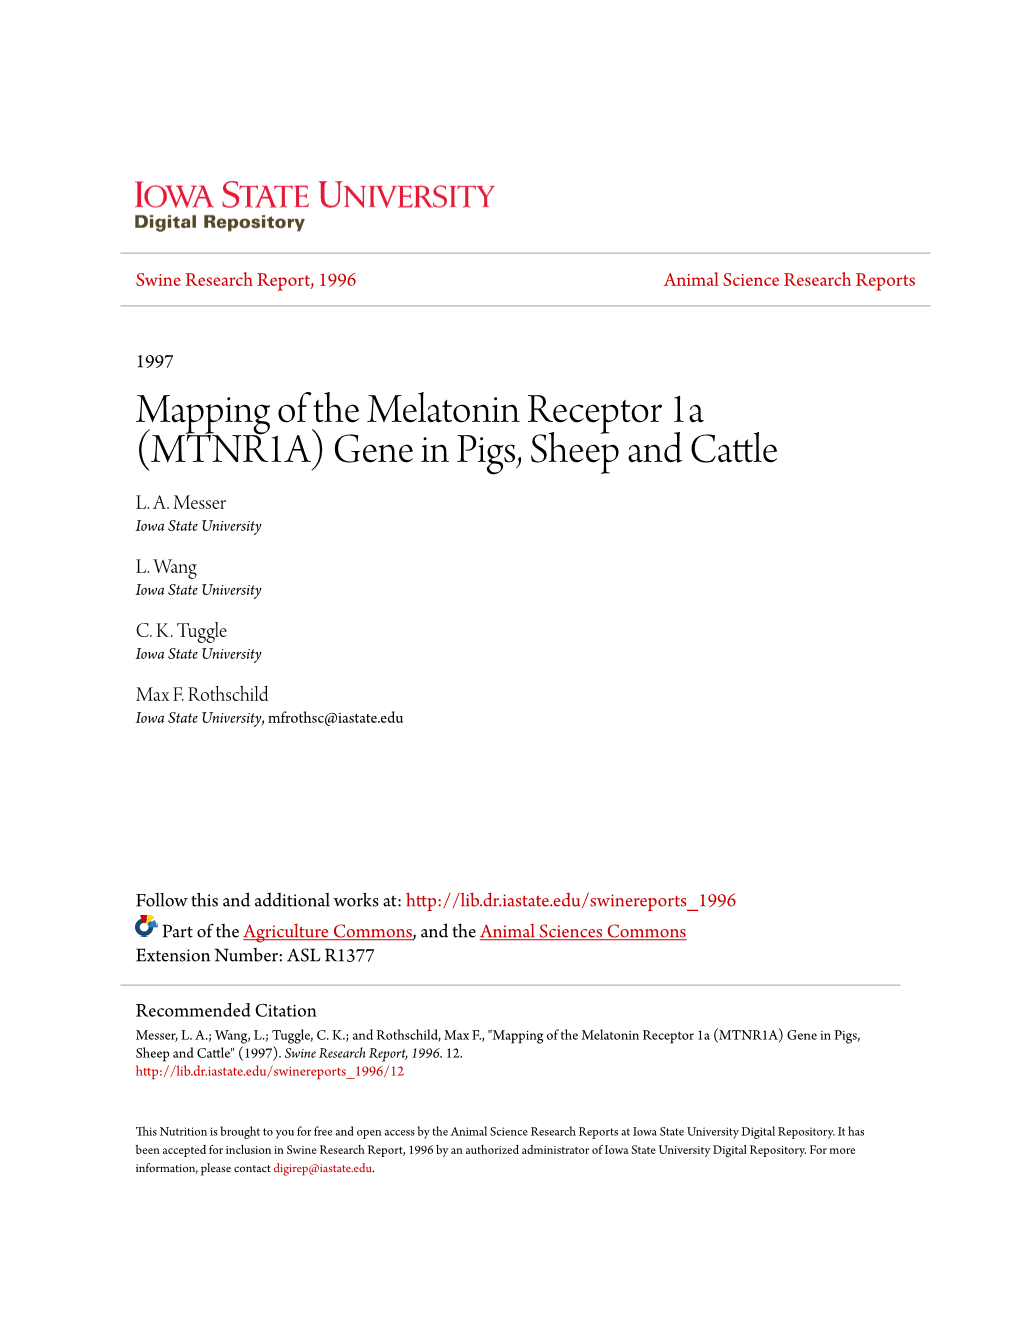 Mapping of the Melatonin Receptor 1A (MTNR1A) Gene in Pigs, Sheep and Cattle L